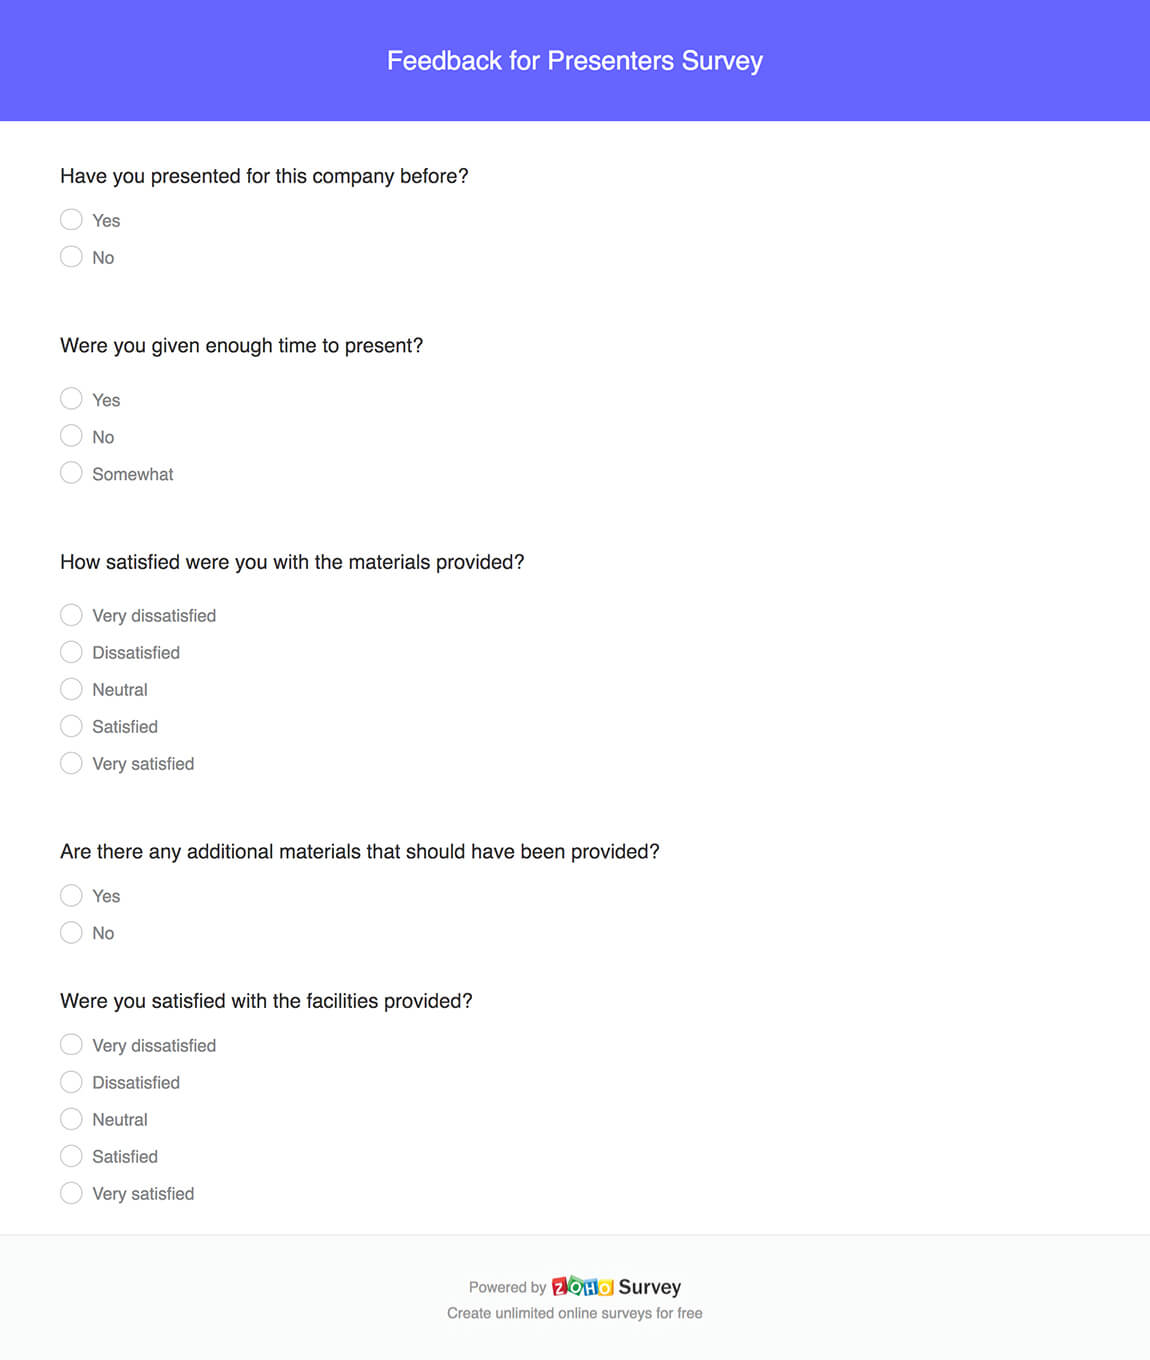 Feedback for presenters survey questionnaire template